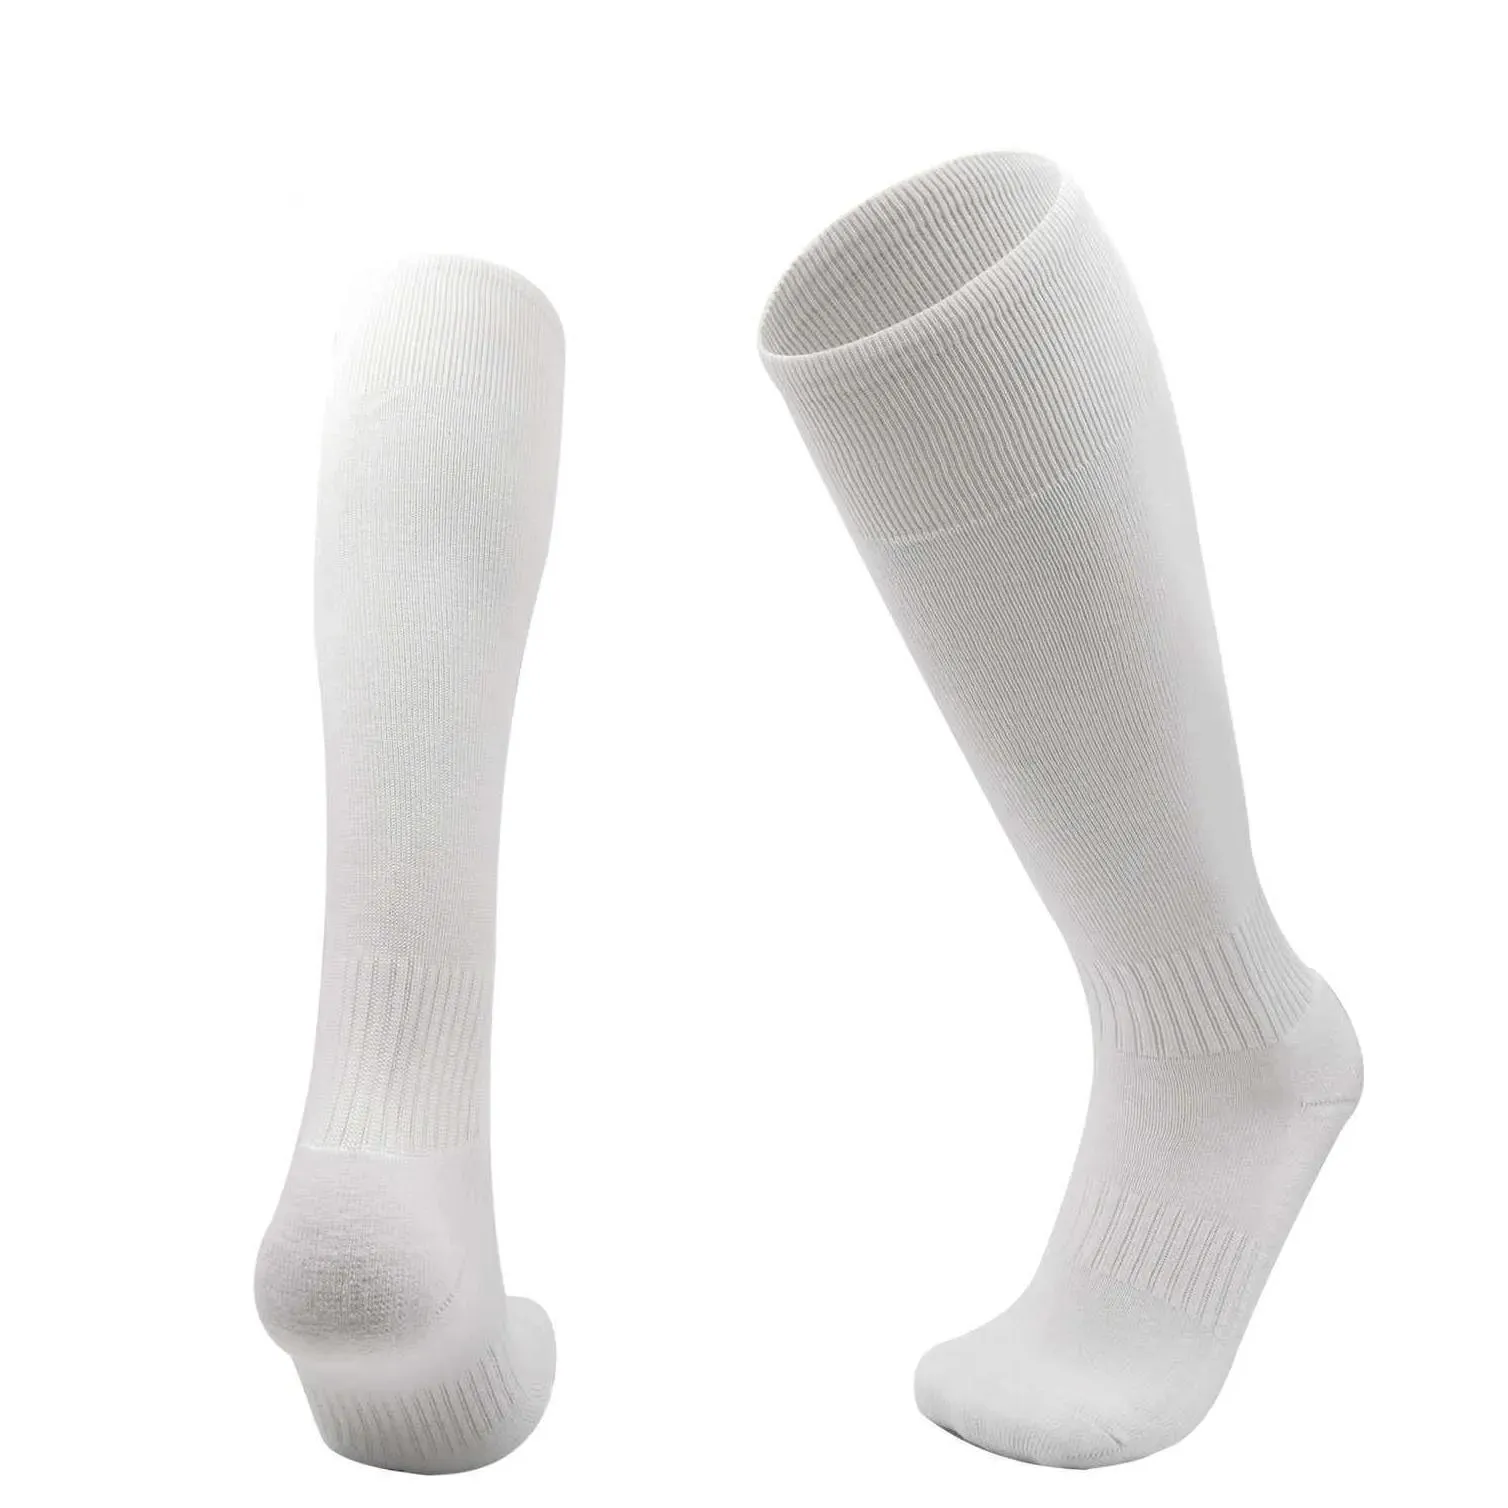 Sports Socks Football Adend Outdoor Rugby Stockings Over Knee High Volleyball Baseball Hockey Kids Adts Long L221026 Drop Delivery Dhmnq